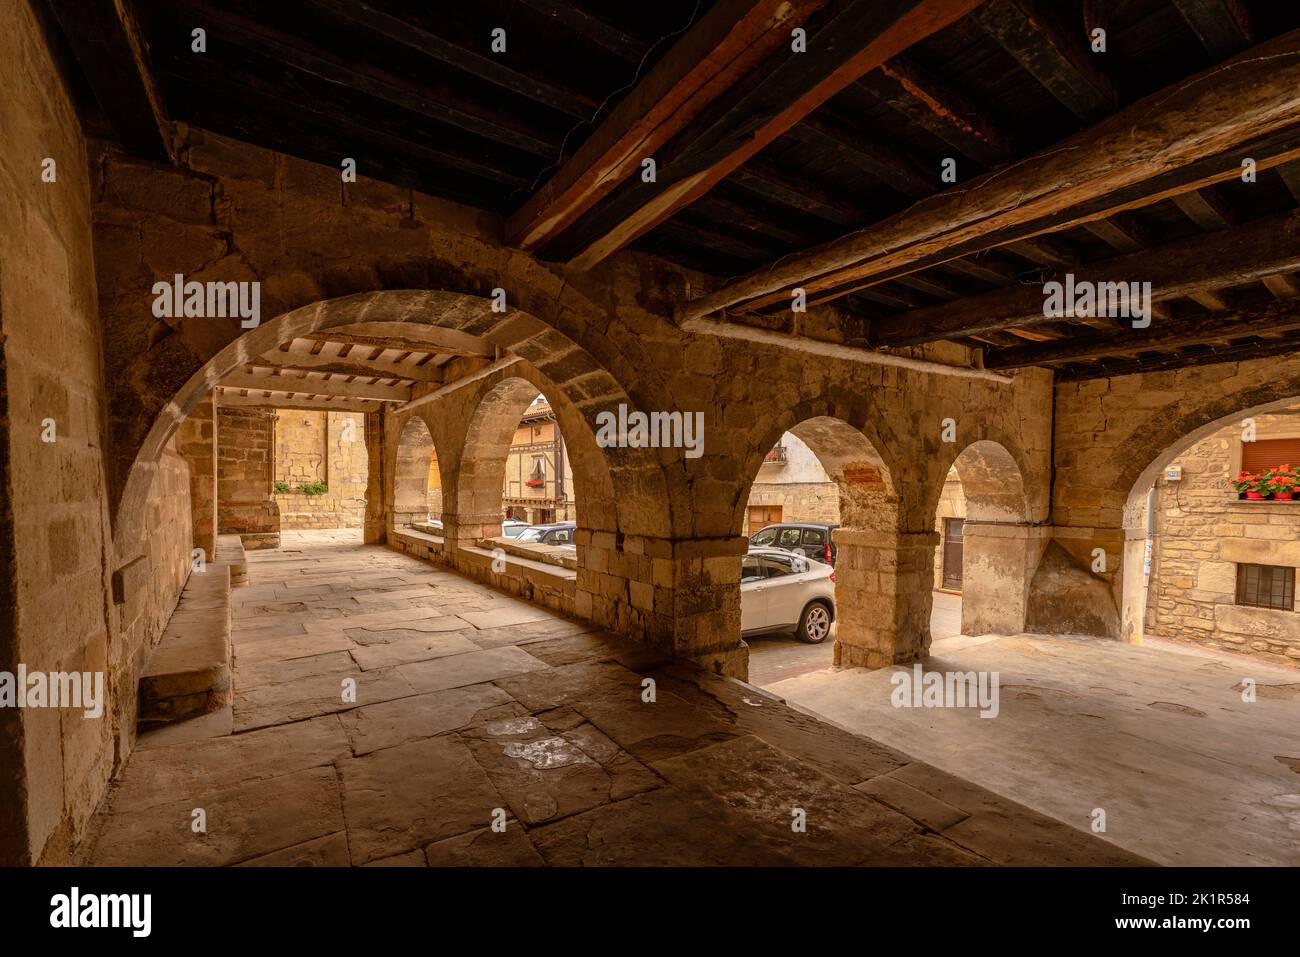 Treviño, Spain. August 5, 2022. Traditional arcade made with stone arches in the very heart of the old village of Treviño, Burgos, Castilla y León, Sp Stock Photo